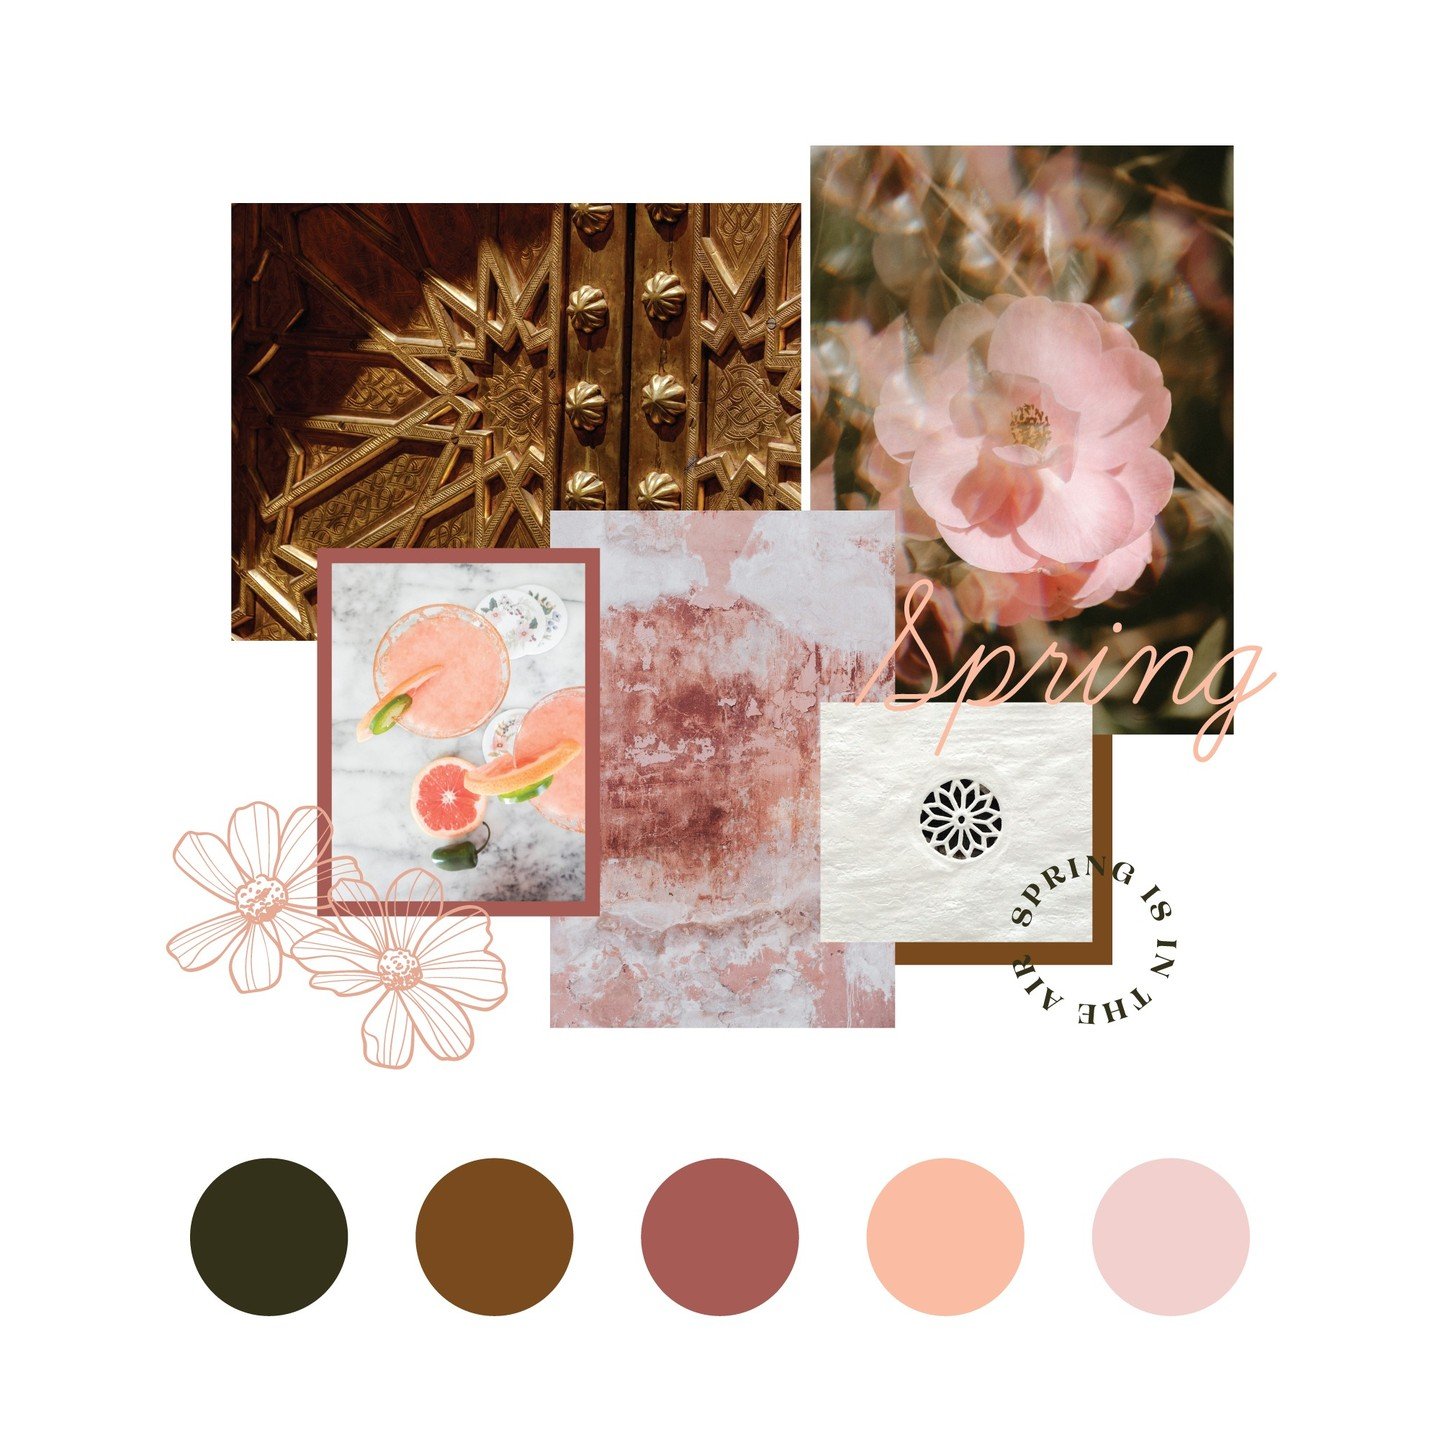 Kicking off the week with a #moodboardmonday 🌸! April weather has been all over the place here in Colorado--60s and sunny, gray and rainy, even a little bit of snow. Despite all that little buds have started sprouting and lots of pretty pink blossom